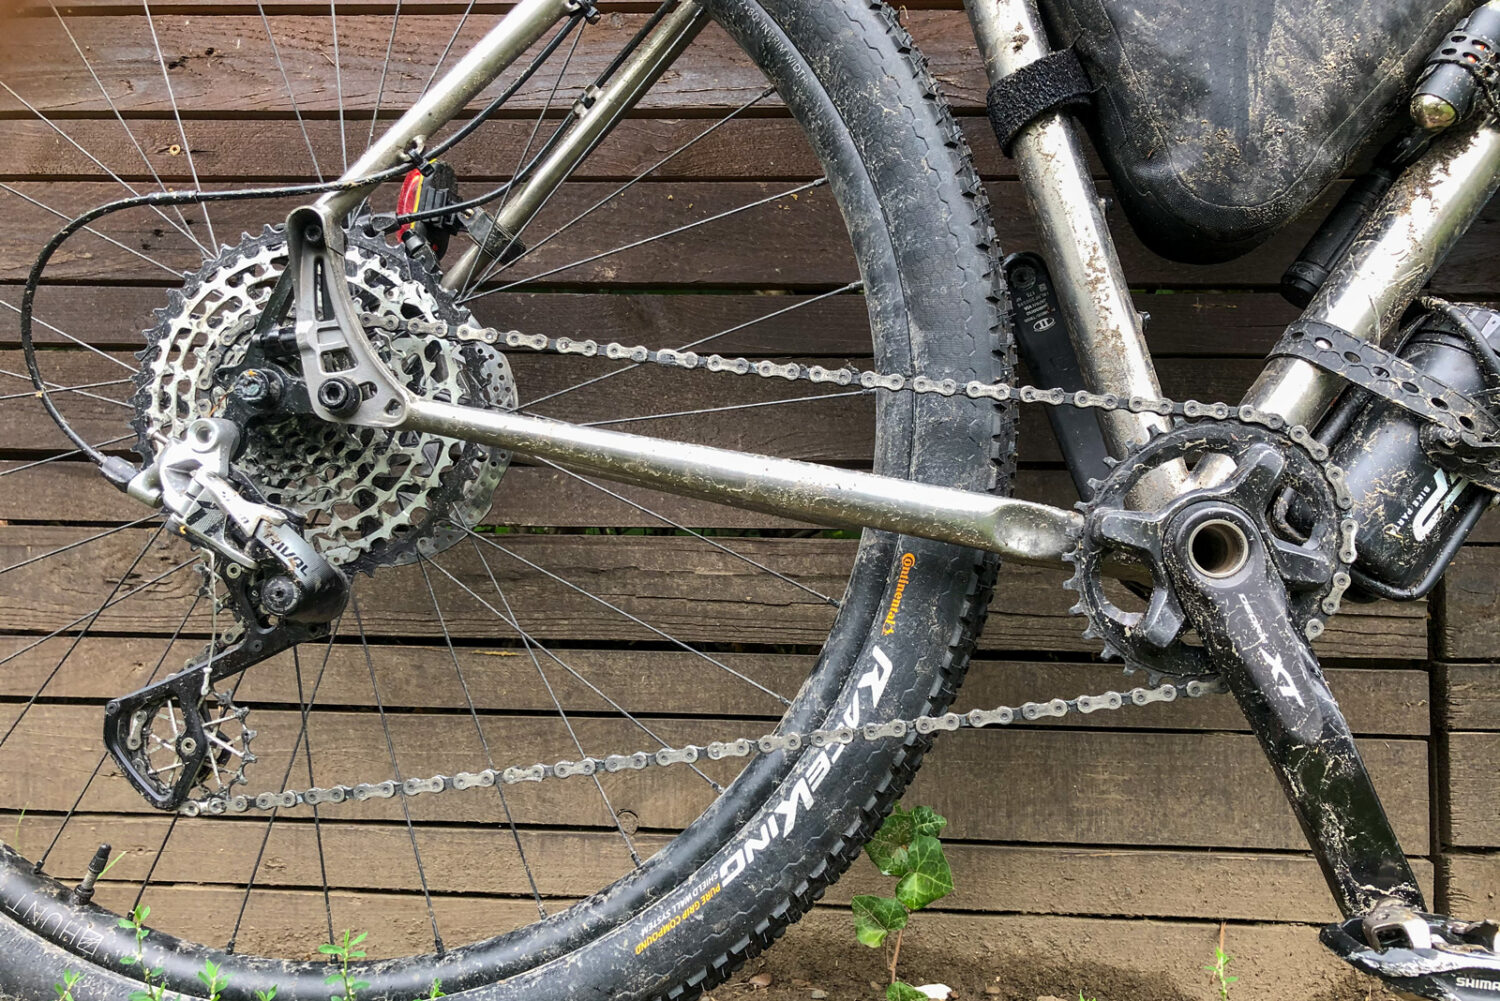 10 THINGS YOU NEED TO KNOW ABOUT THE GRAVEL BIKE – ULLER